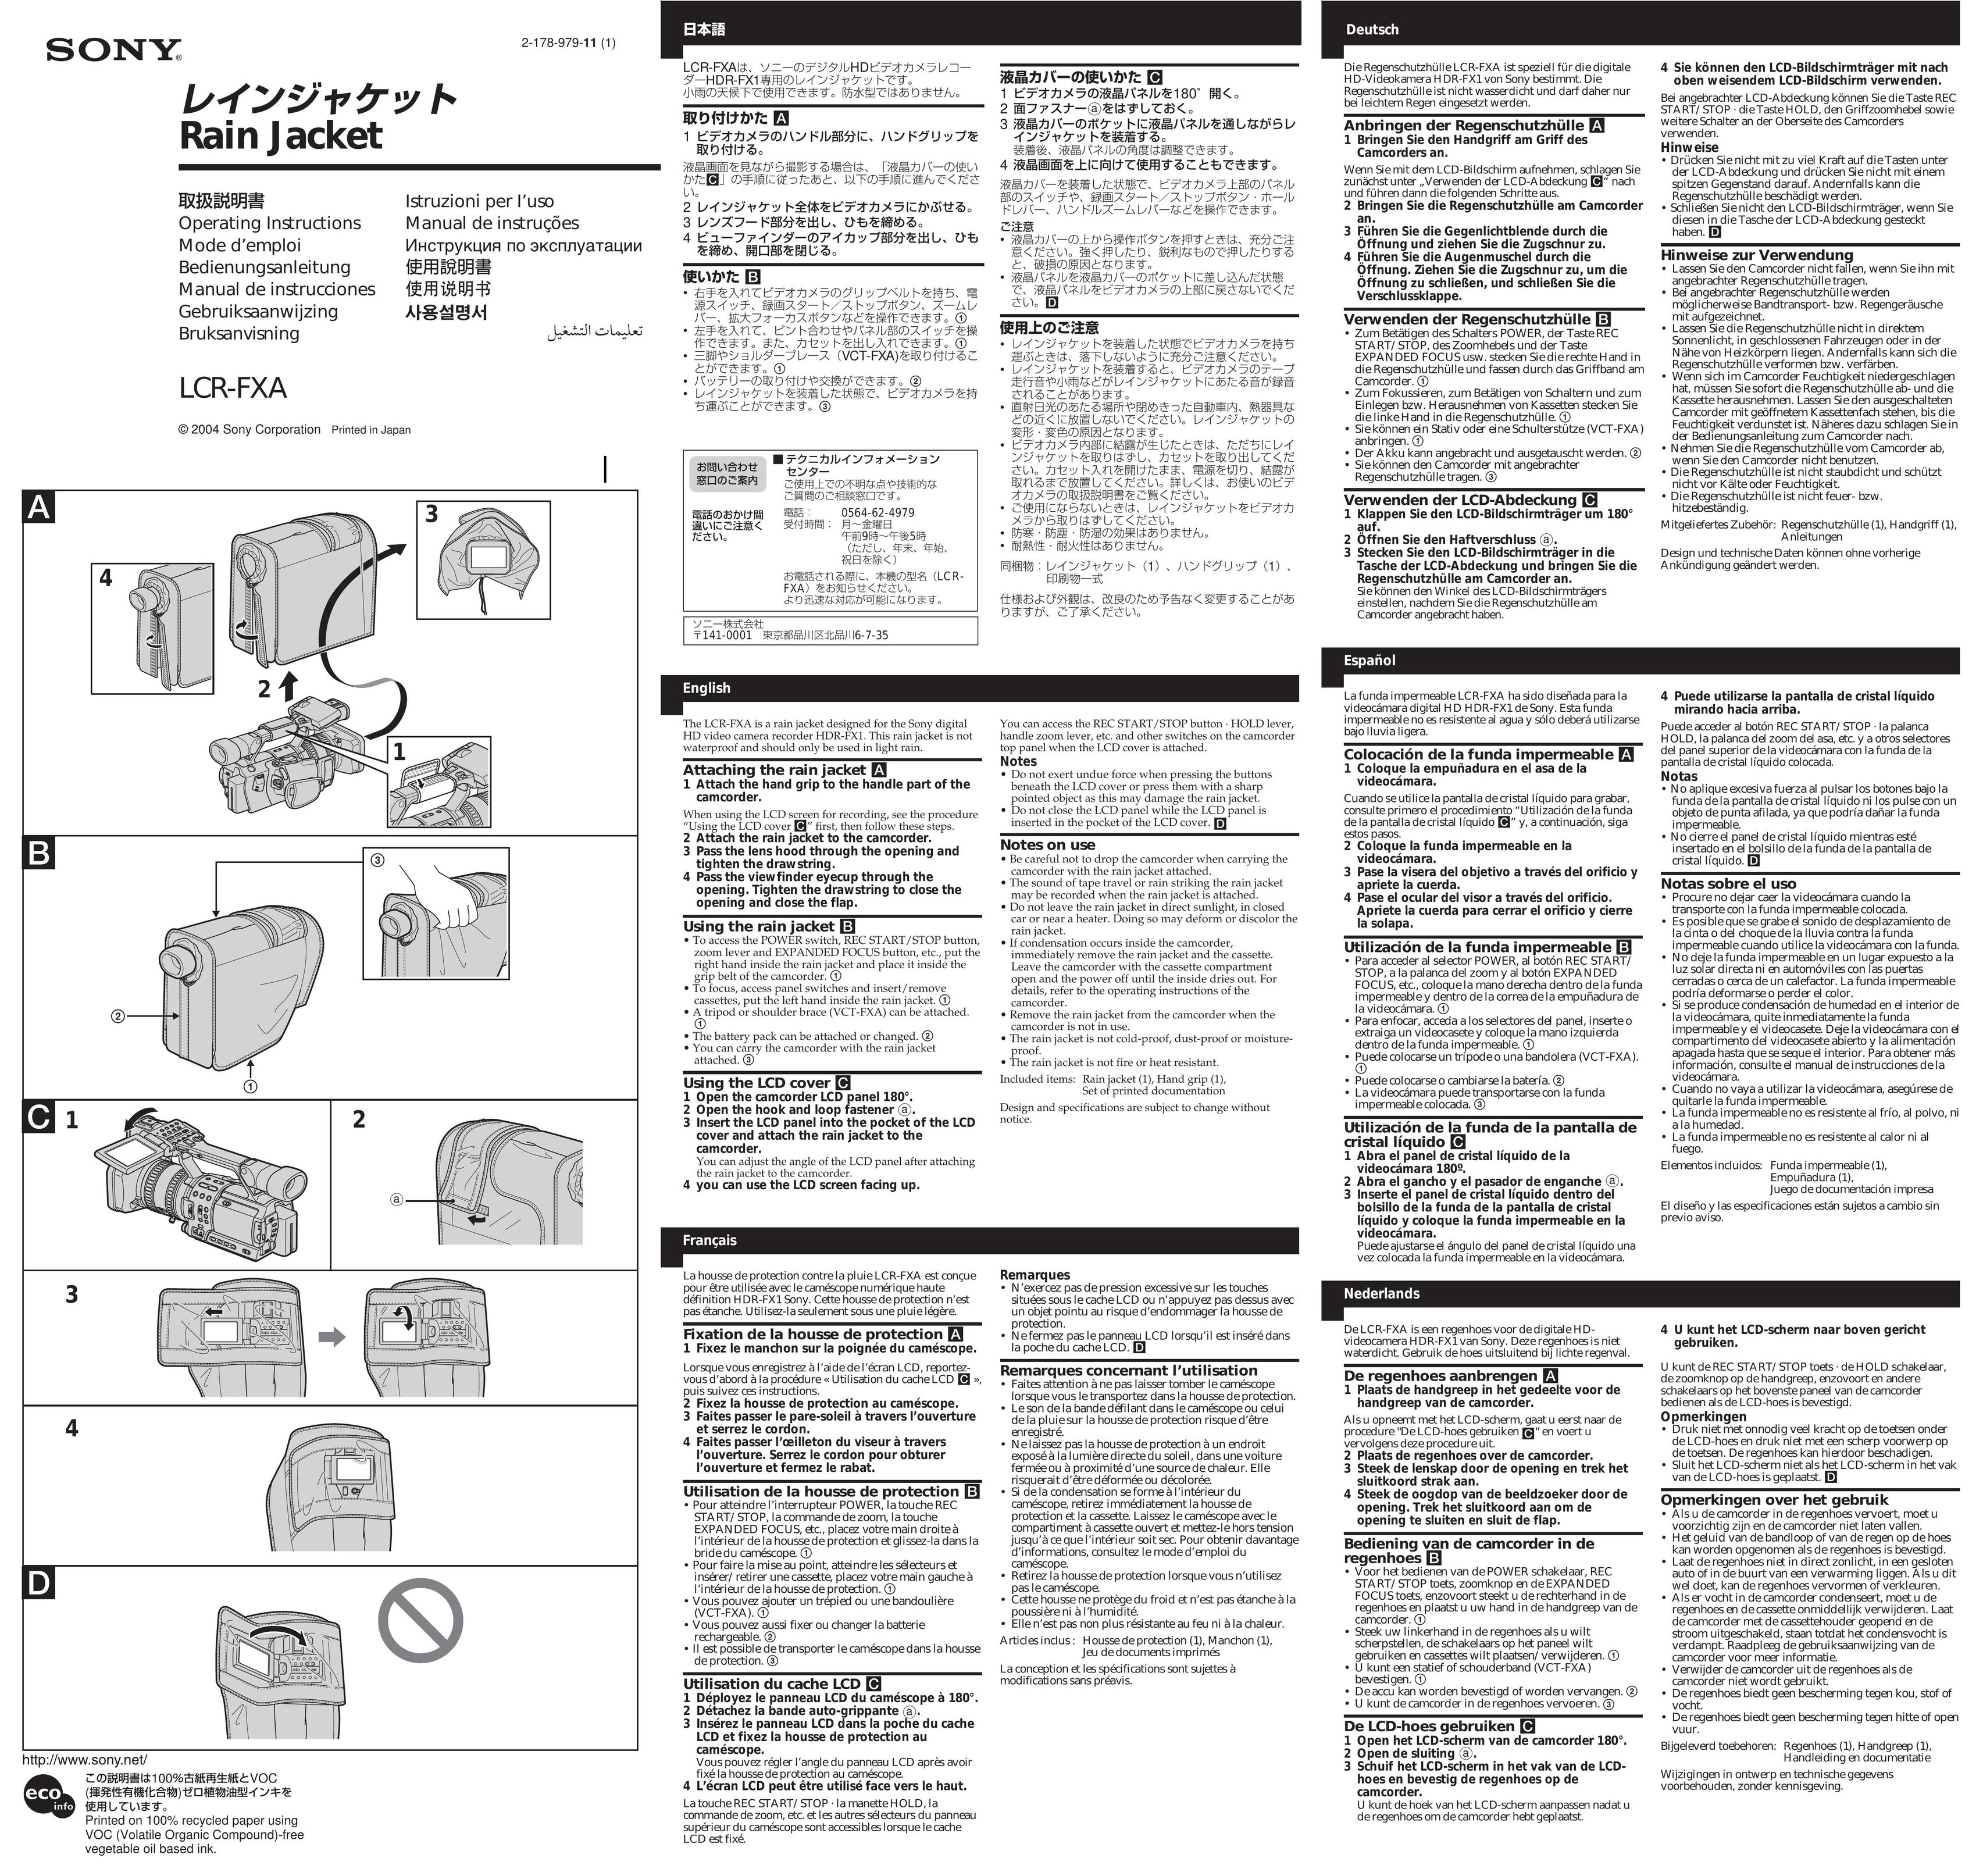 Sony LCR-FXA Carrying Case User Manual